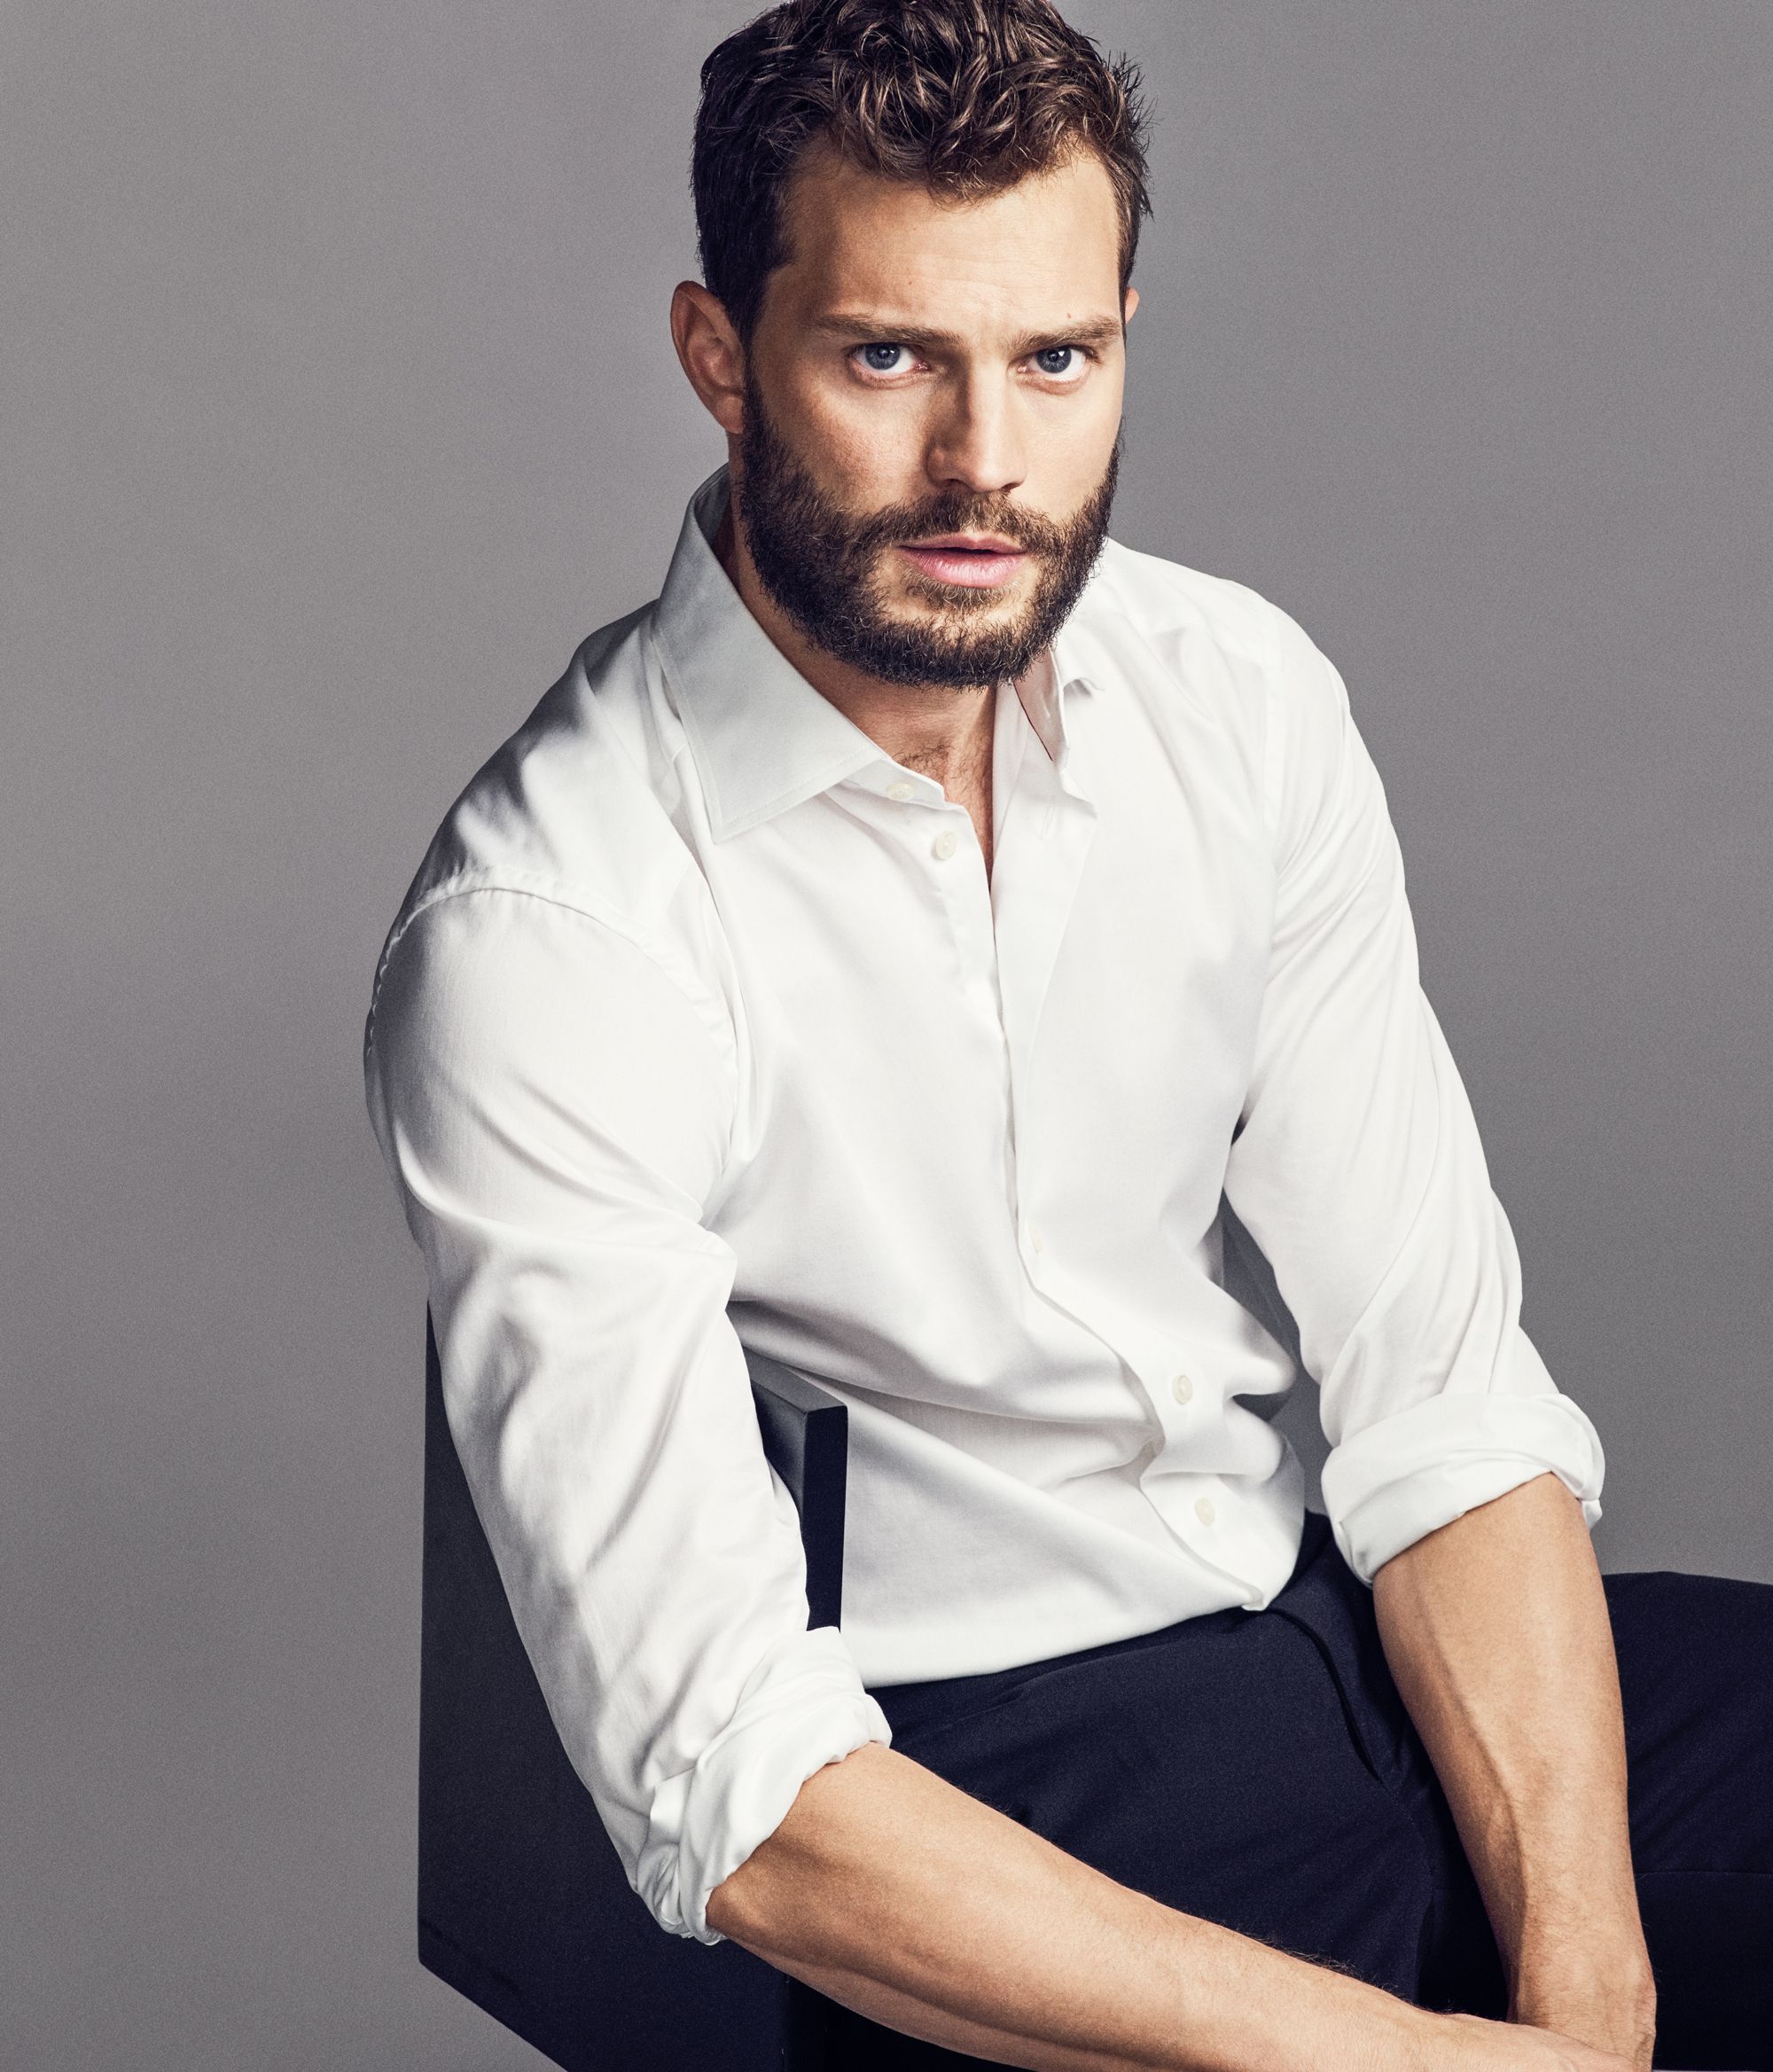 Jamie Dornan Reveals the One “Issue” With Fifty Shades of Grey